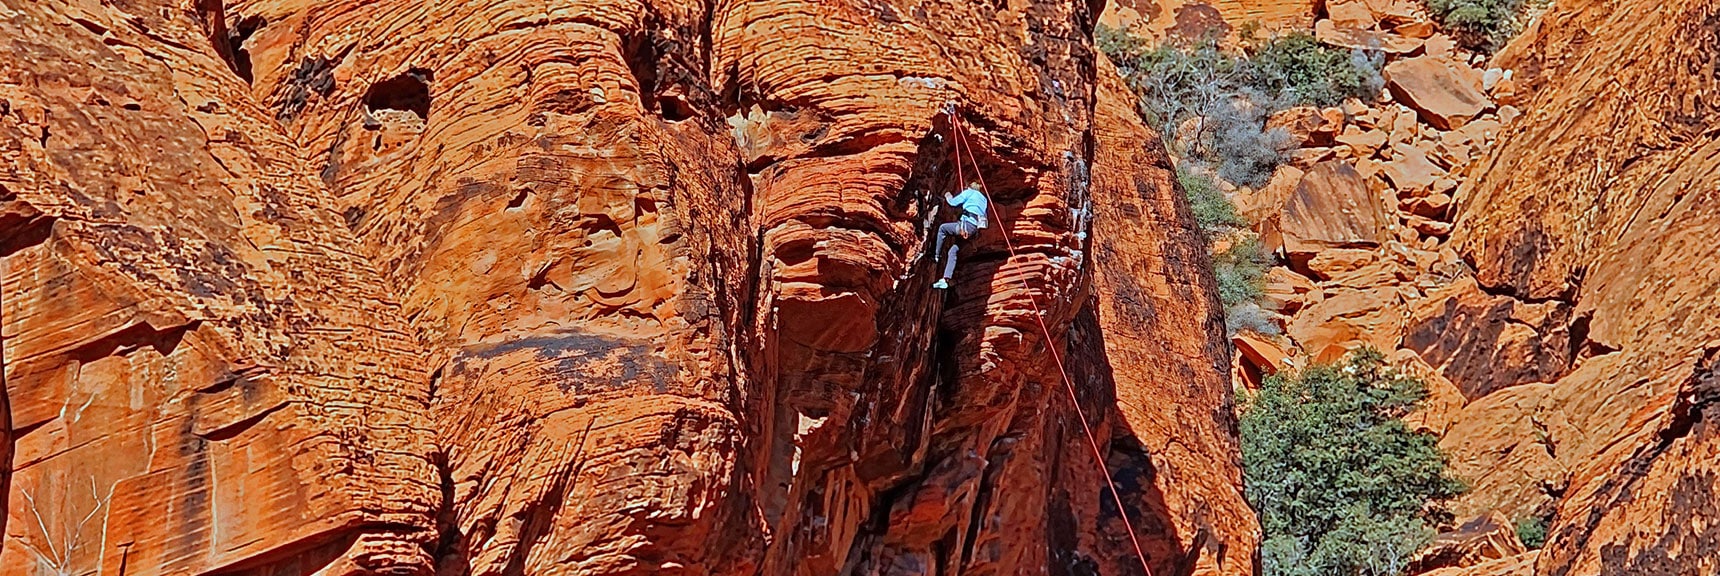 Watch for Advanced Rock Climbers on Cliff Walls to Your Right | Lower Calico Hills Loop | Calico Basin & Red Rock Canyon, Nevada